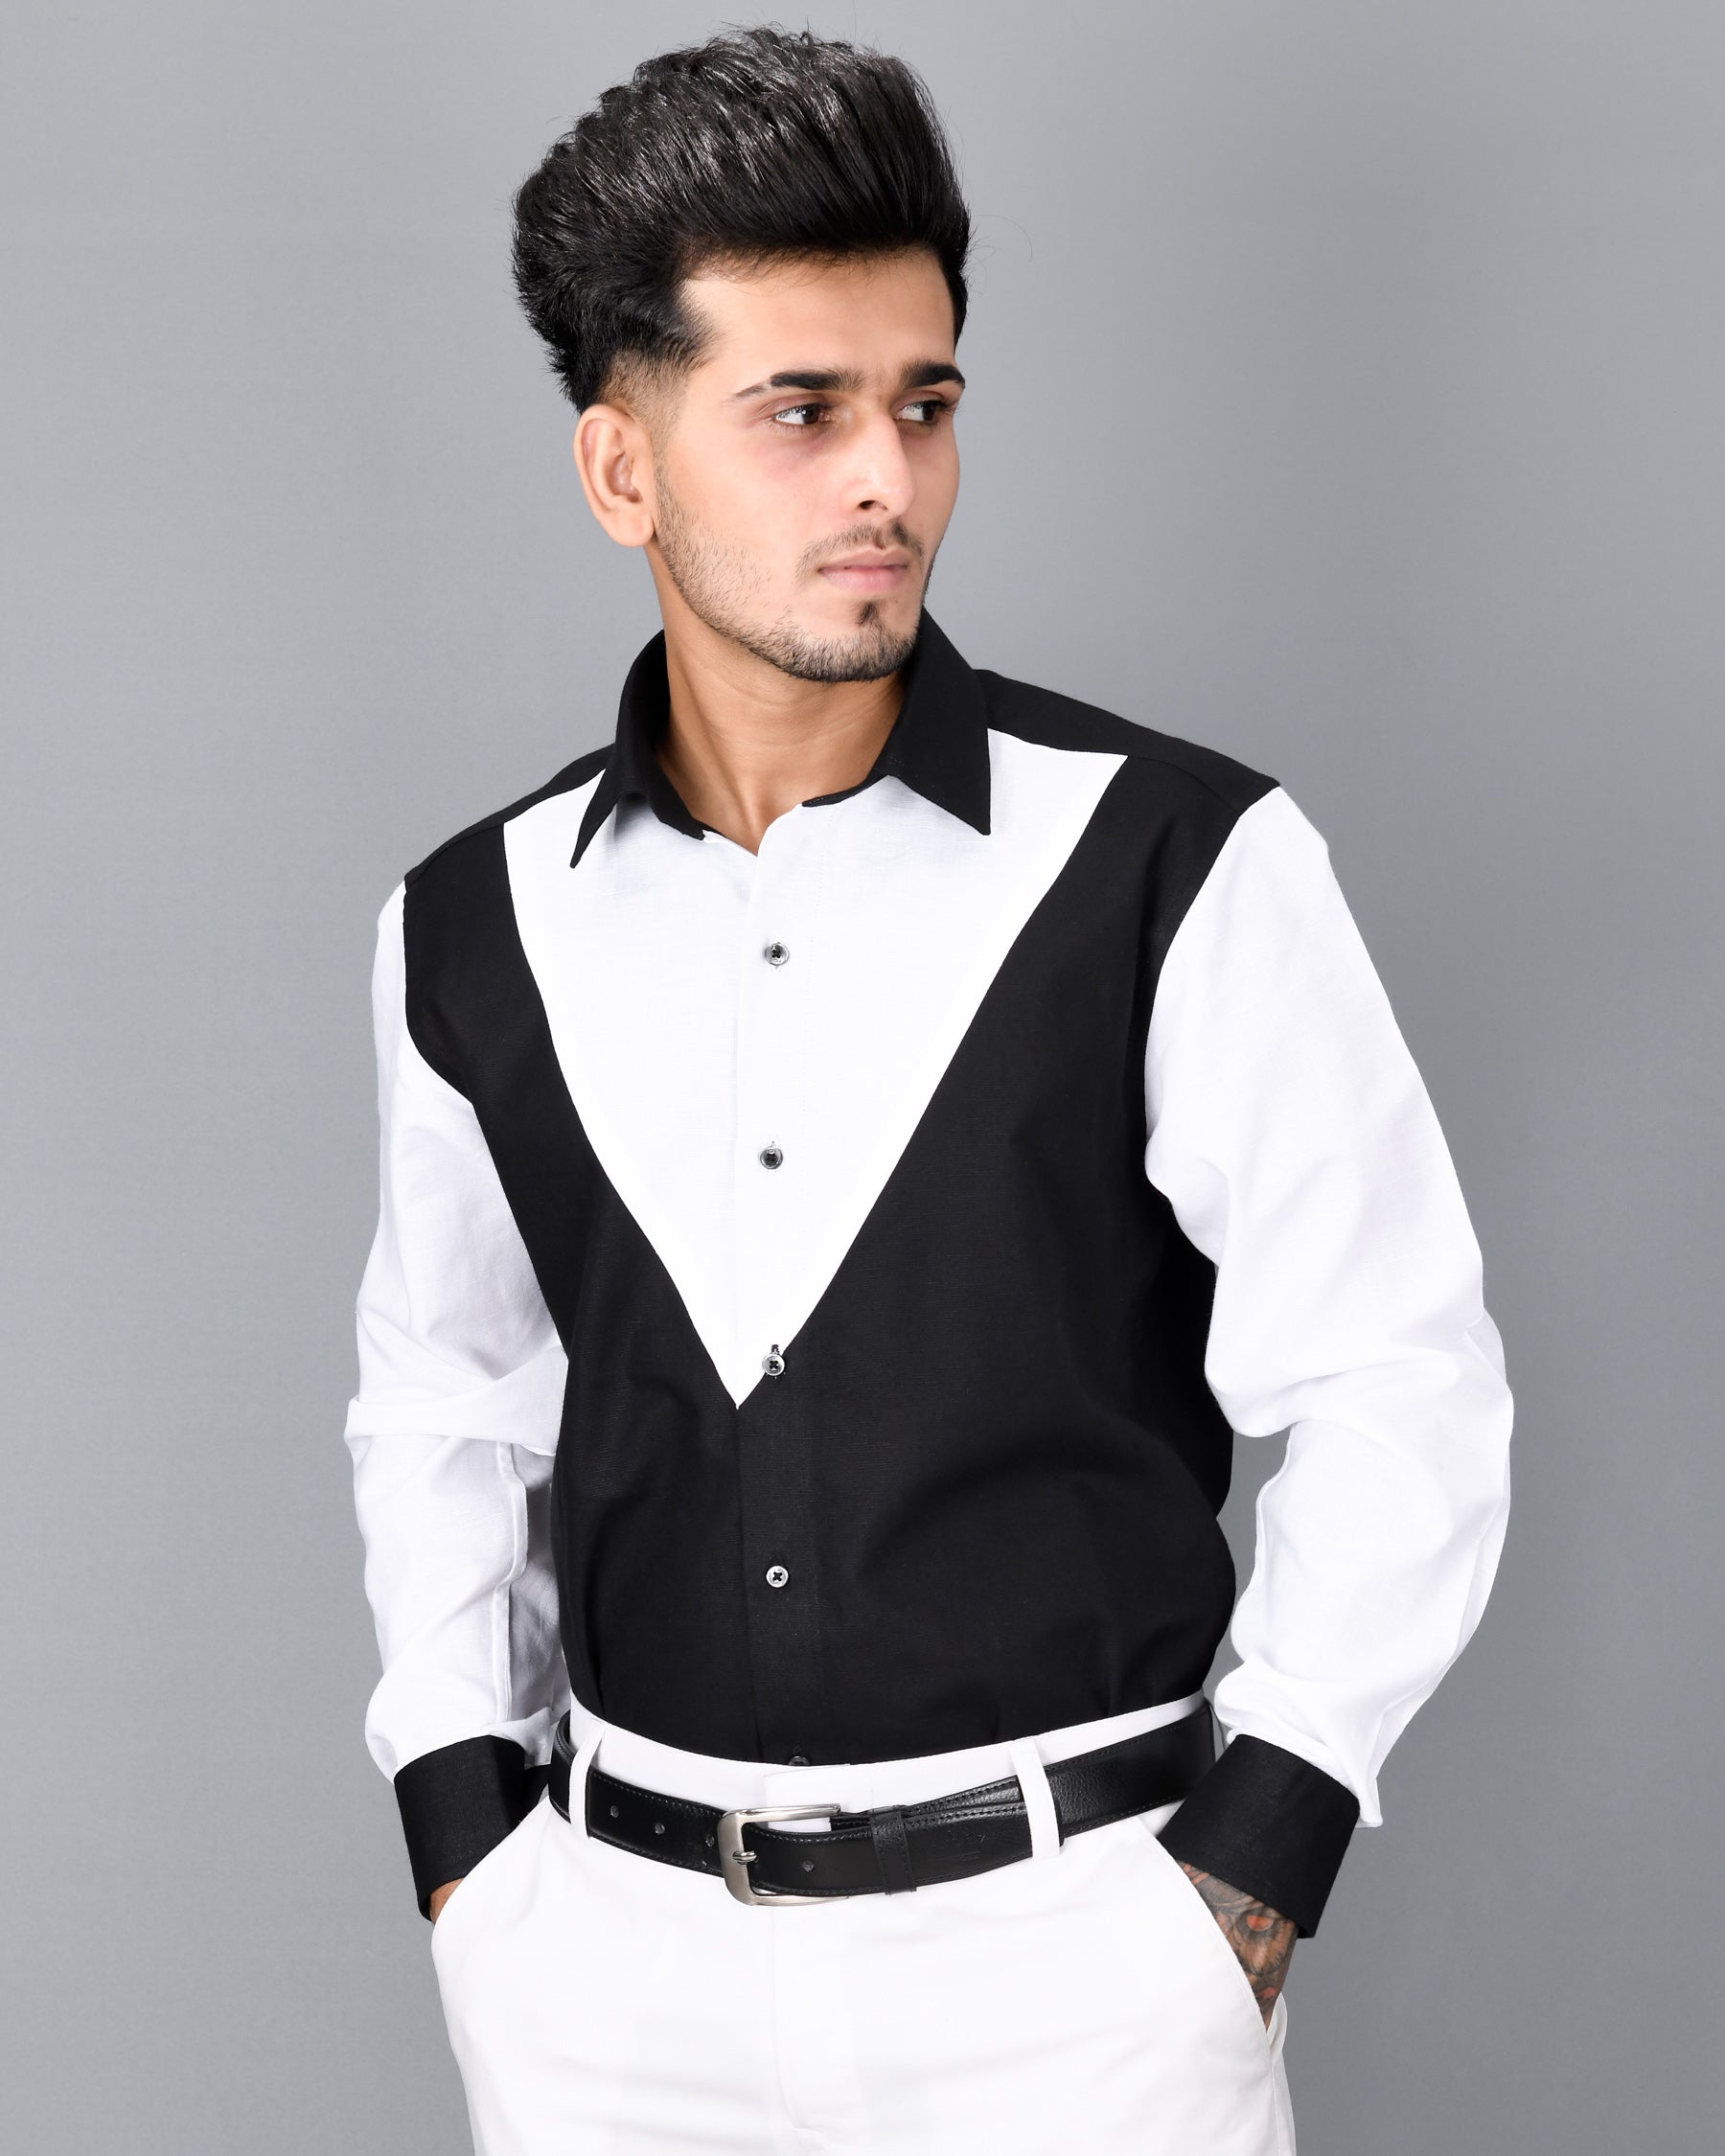 Jade Black with White Patterned Luxurious Linen Shirt 3718BLK-P23-38, 3718BLK-P23-H-38, 3718BLK-P23-39, 3718BLK-P23-H-39, 3718BLK-P23-40, 3718BLK-P23-H-40, 3718BLK-P23-42, 3718BLK-P23-H-42, 3718BLK-P23-44, 3718BLK-P23-H-44, 3718BLK-P23-46, 3718BLK-P23-H-46, 3718BLK-P23-48, 3718BLK-P23-H-48, 3718BLK-P23-50, 3718BLK-P23-H-50, 3718BLK-P23-52, 3718BLK-P23-H-52